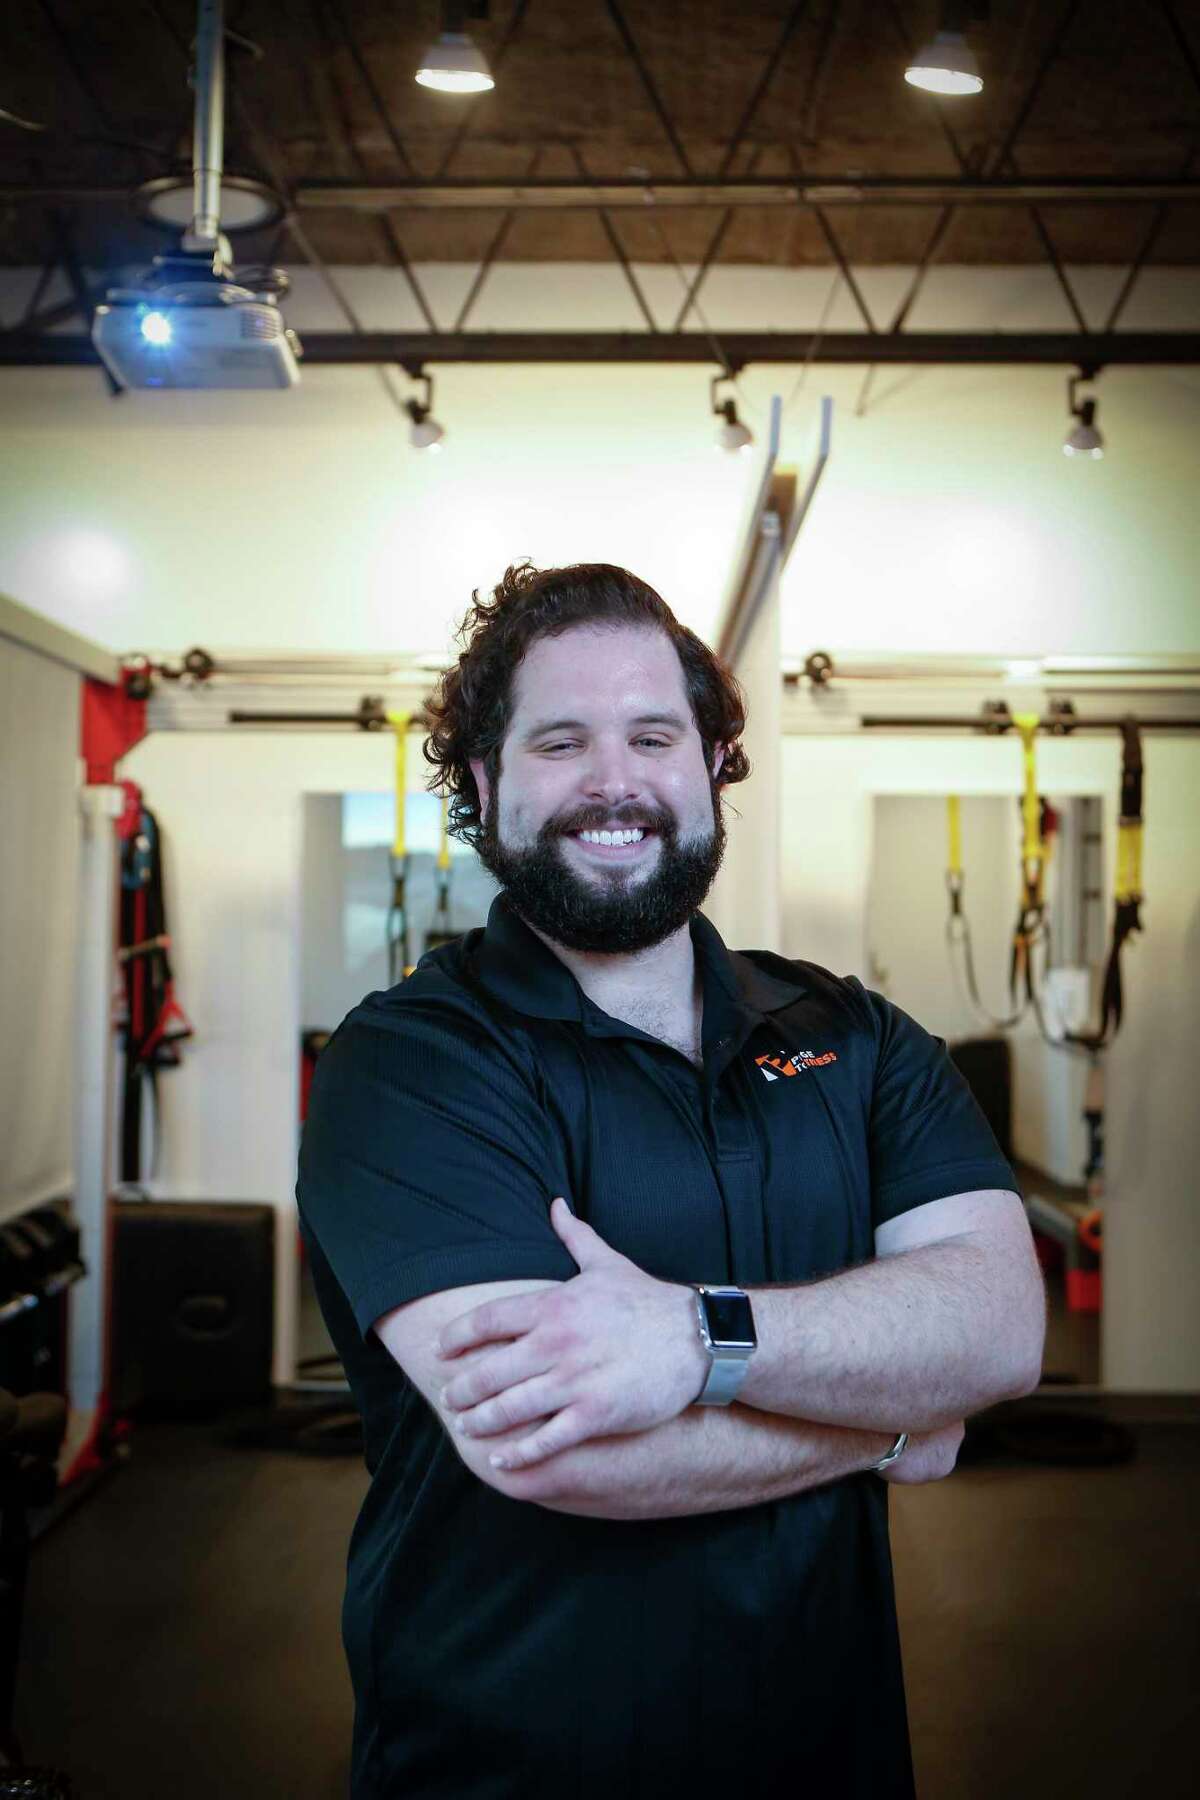 Pledge to Fitness owner, Andres Loperena poses for a photo in his boutique gym Friday, Dec. 18, 2020, in Houston.